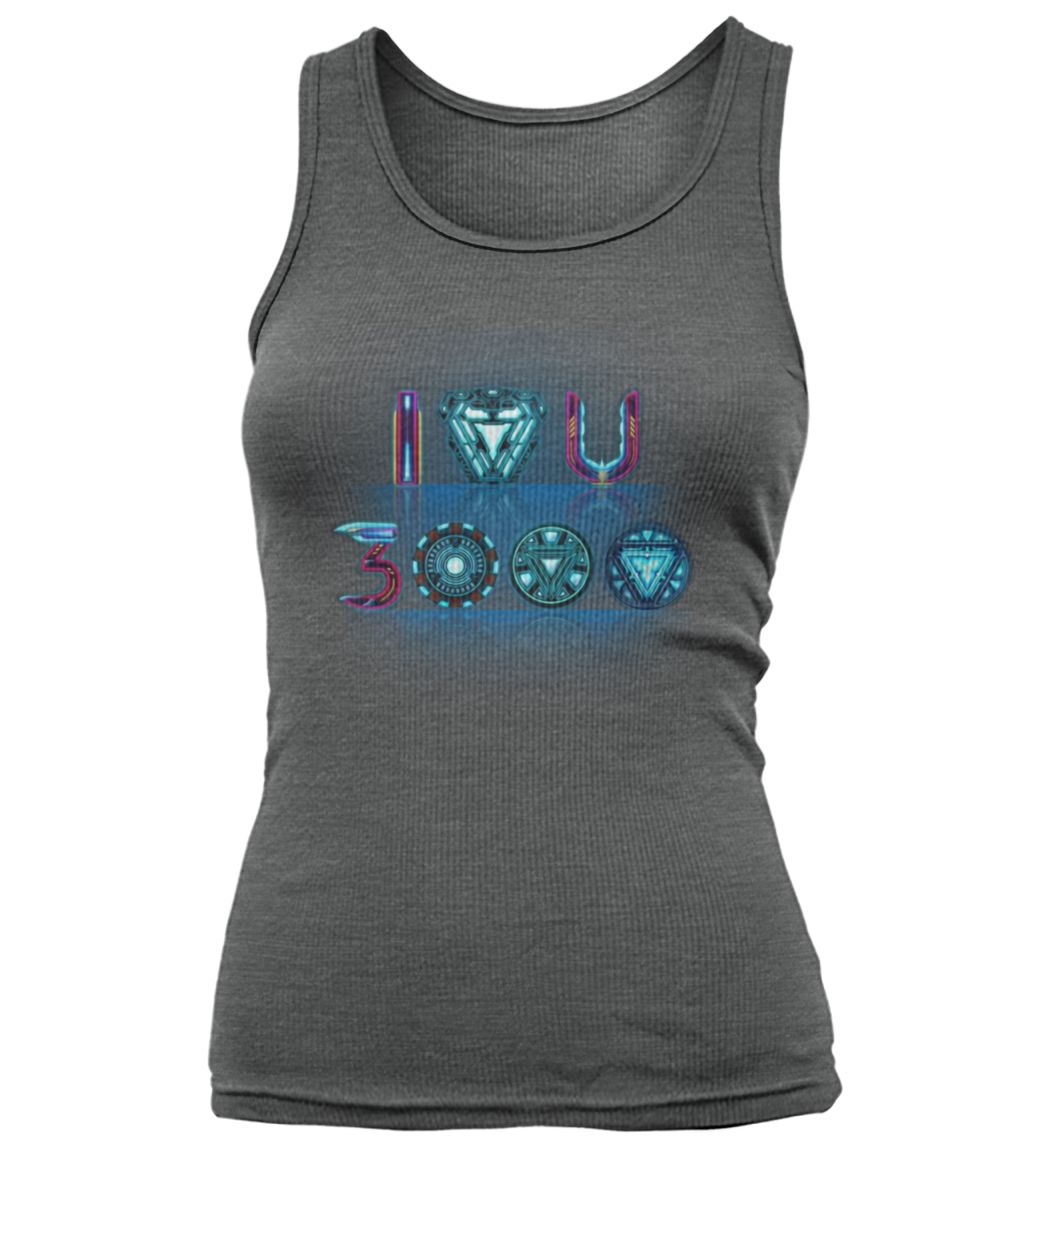 Avengers end game I love you 3000 women's tank top